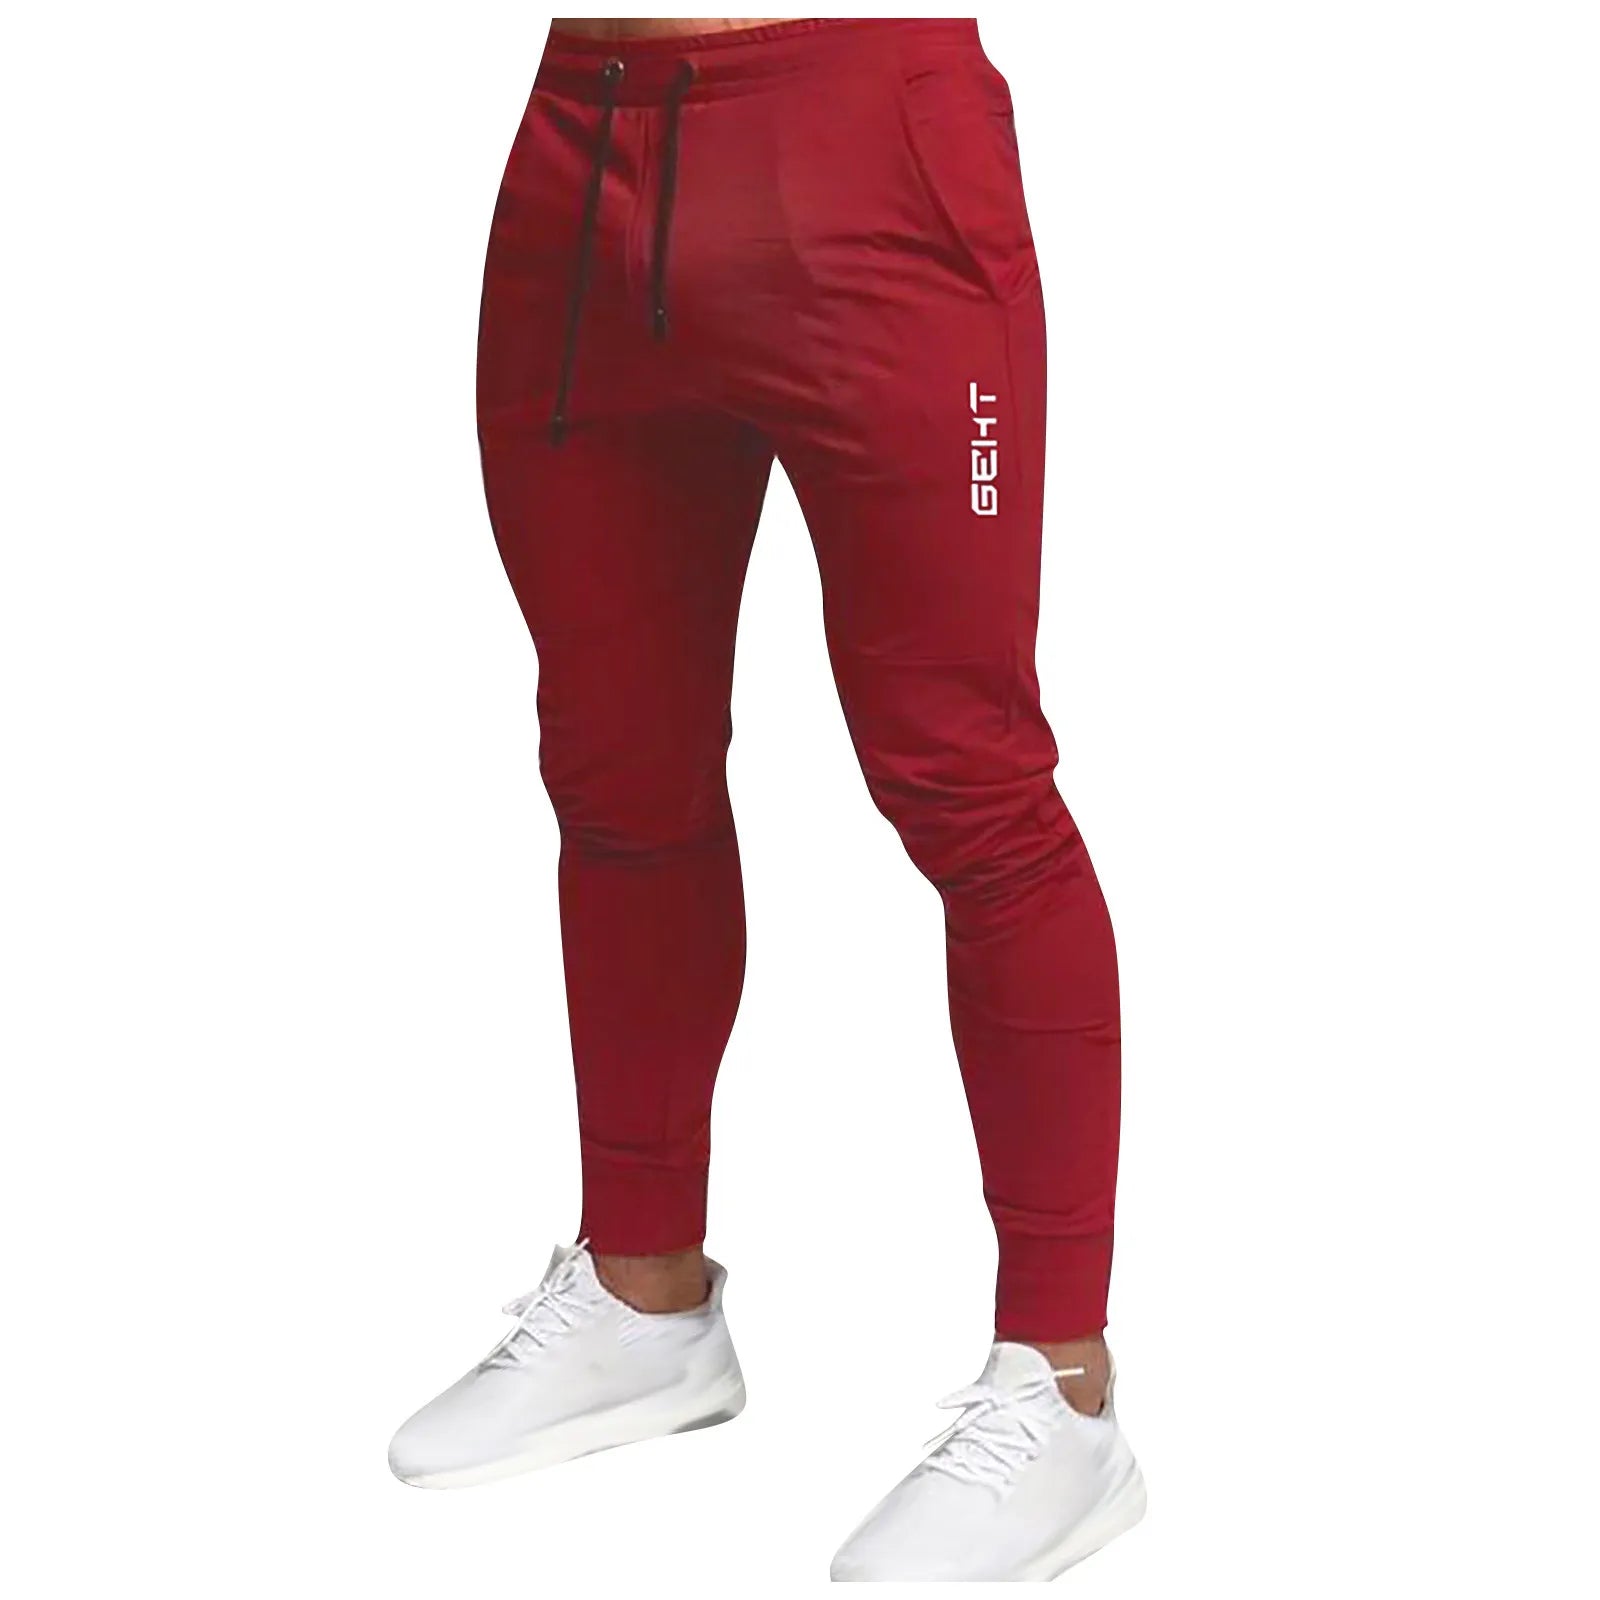 Mens Athletic Sweatpants | Casual Joggers, Gym Pants, Sports - VarietyGifts